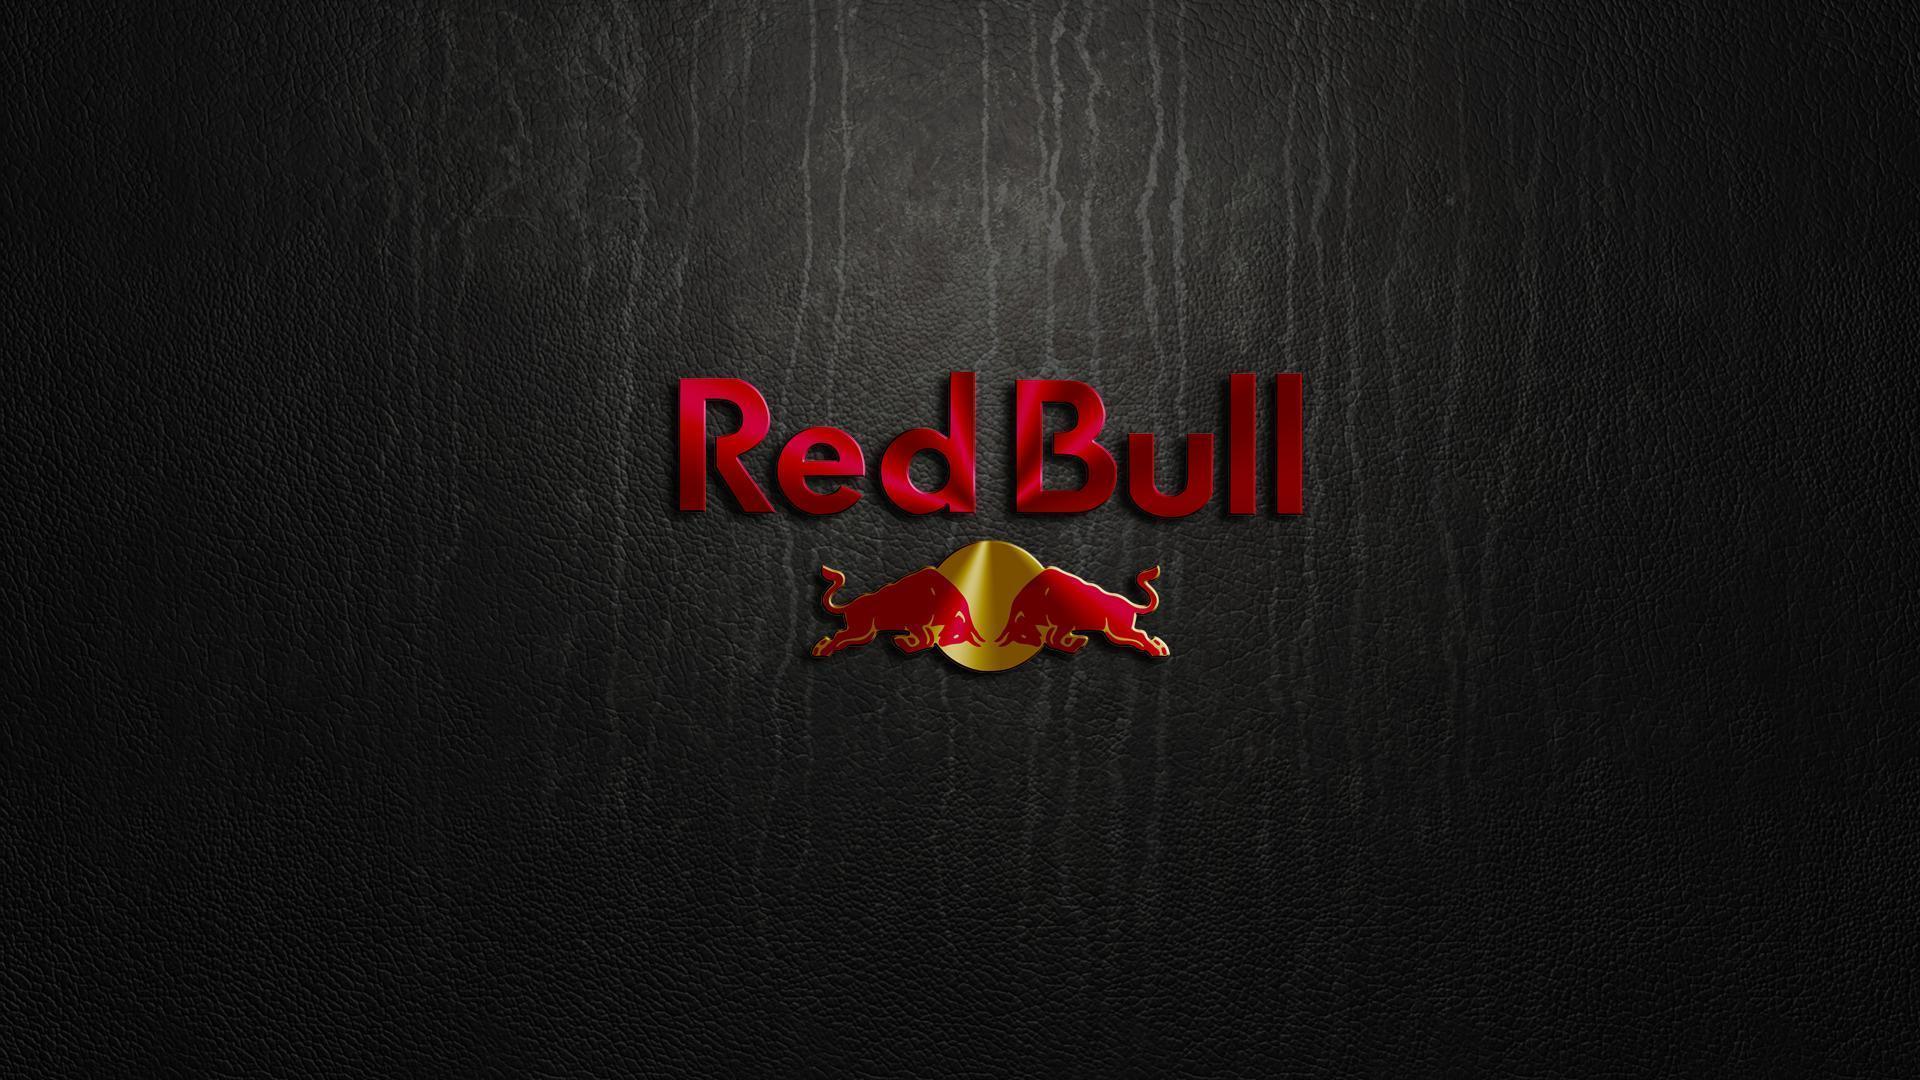 Red Bull Logo And Brand 1920×1080